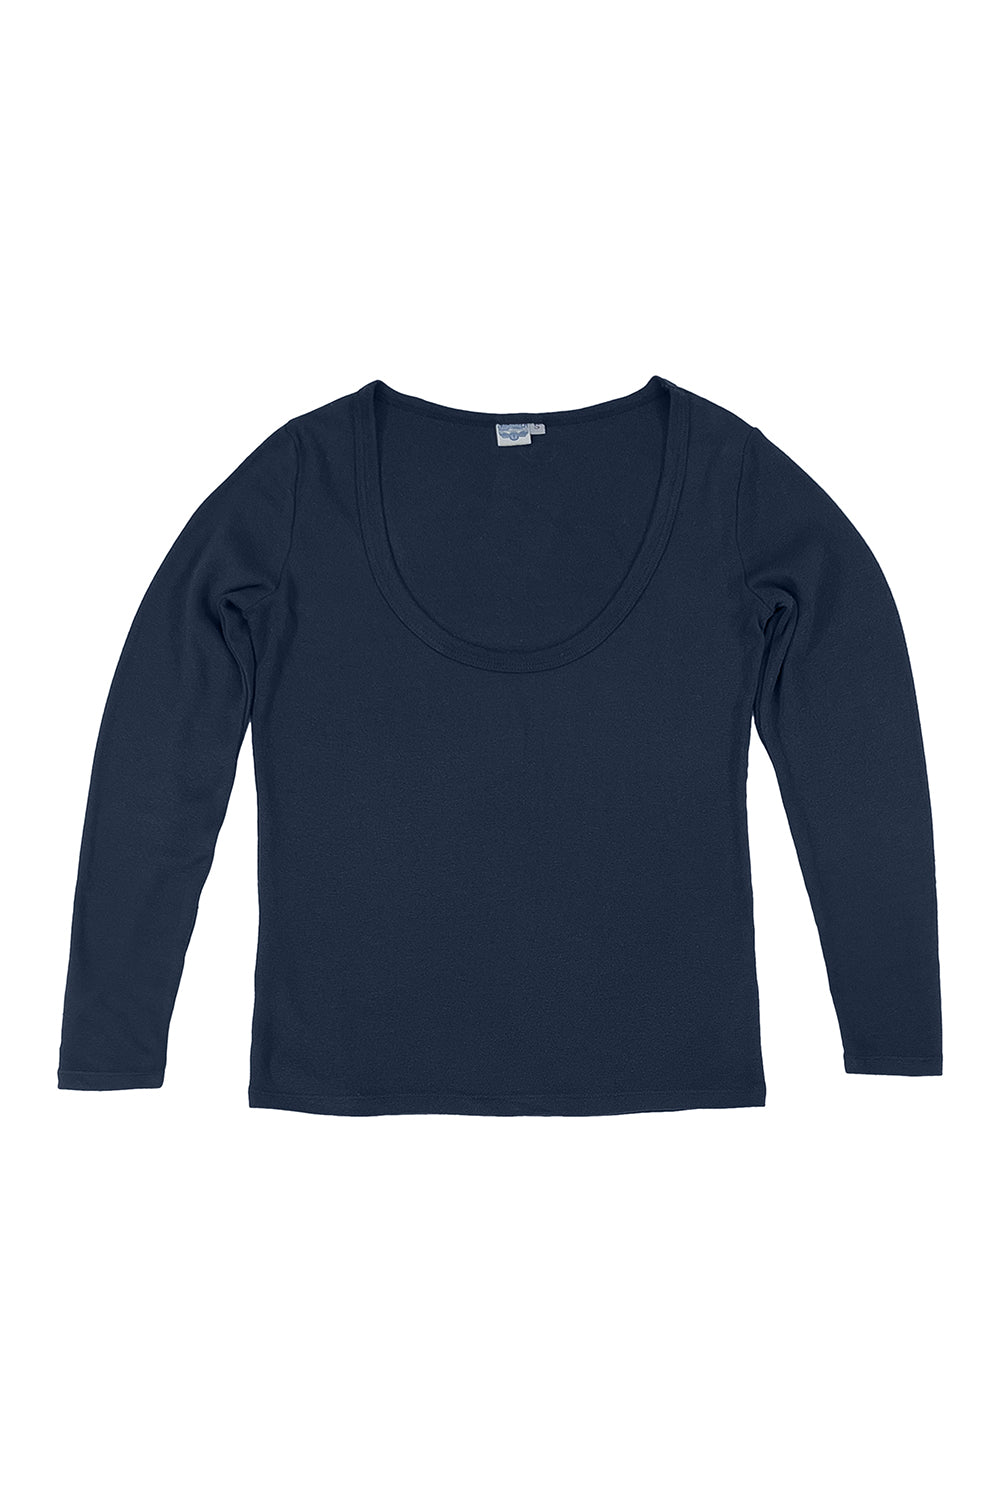 Paseo Long Sleeve Tee | Jungmaven Hemp Clothing & Accessories / Color: Navy